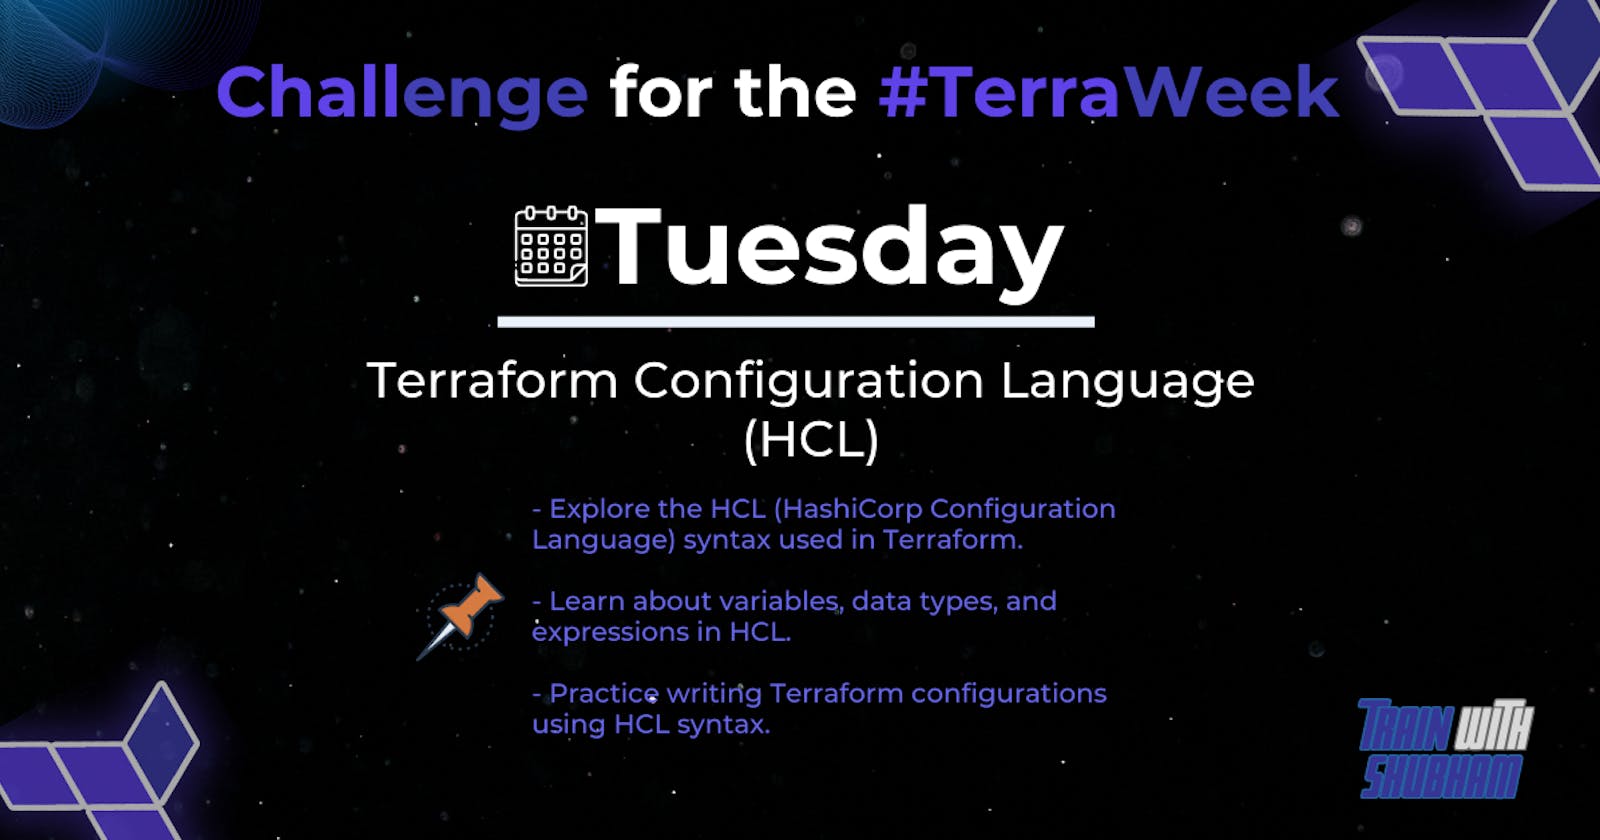 Unlock the full potential of Infrastructure as Code by mastering HCL  in Terraform